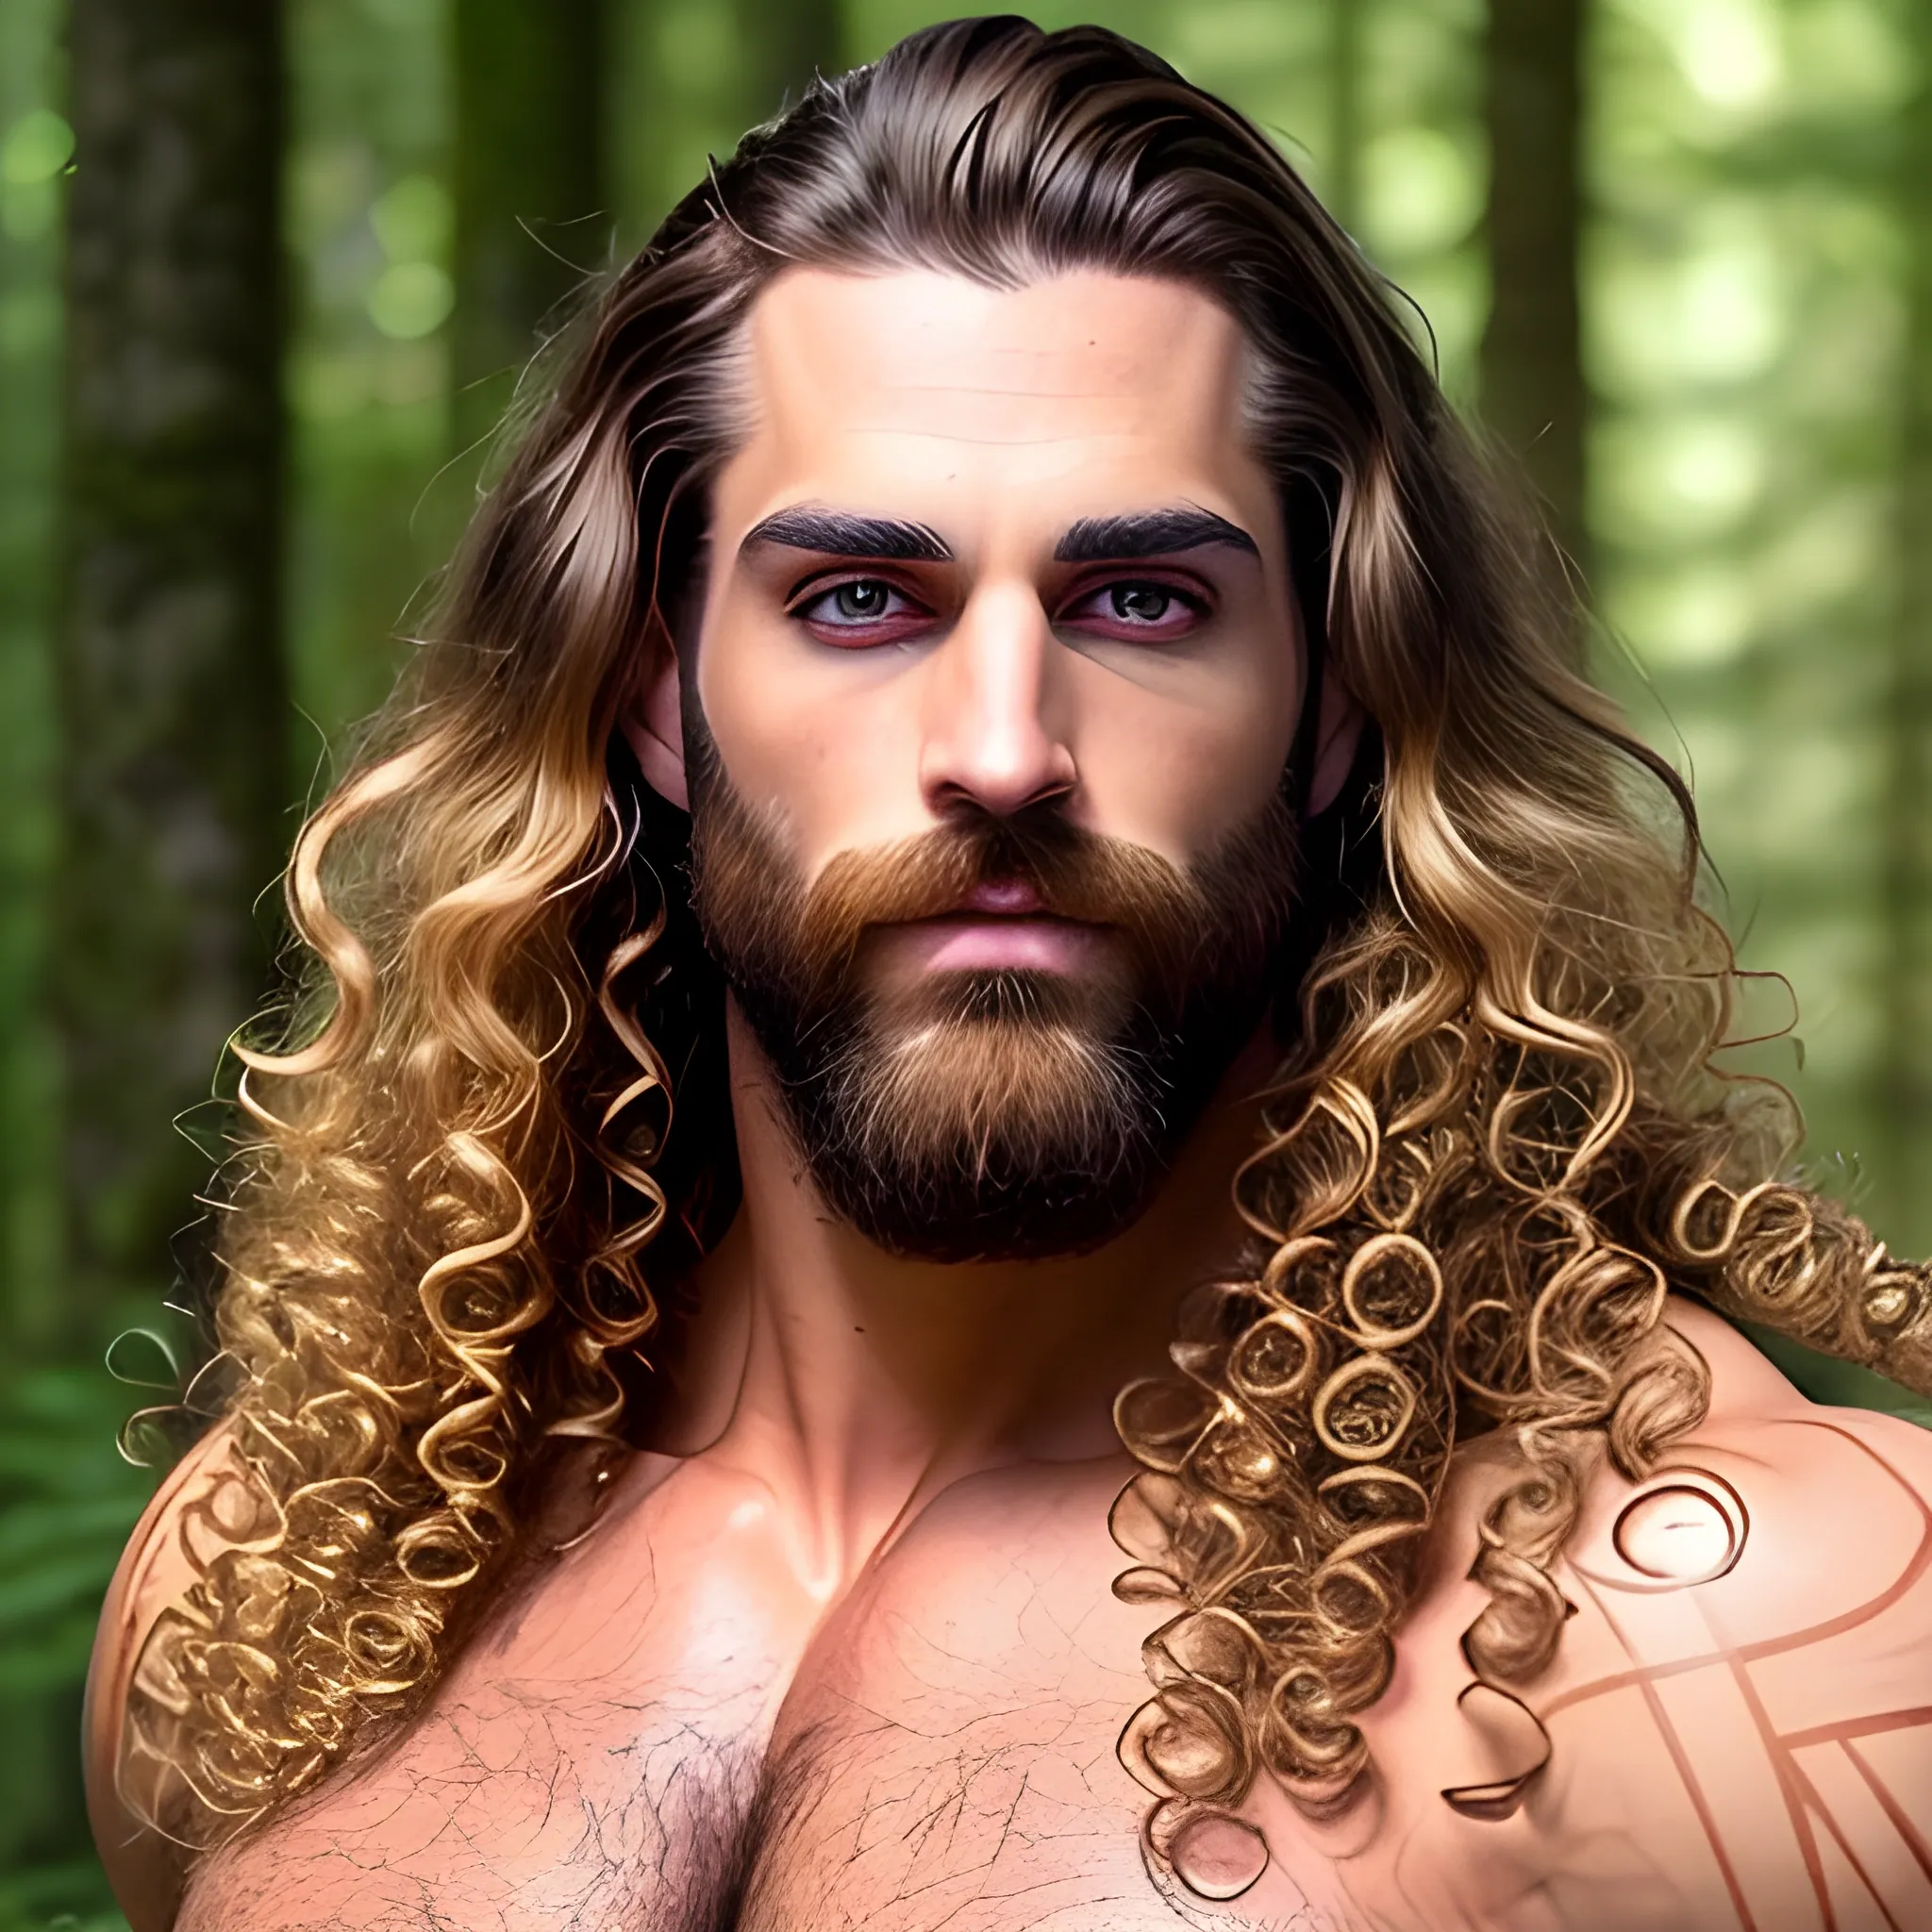 dude in nature,handsome,beauty,muscle, no blurry,dark eyes,hyperealistic stand,german, tanned skin,long curly hair,blondhair,colorfull small tanga with gold details,same facial halves, from side ,happy,whole body with legs,big bulge,clear eyes,huge bulge,hairy,fine details, young,two identical symmetrical eyes,same colofull eyes, stubble ,blond,very long hair